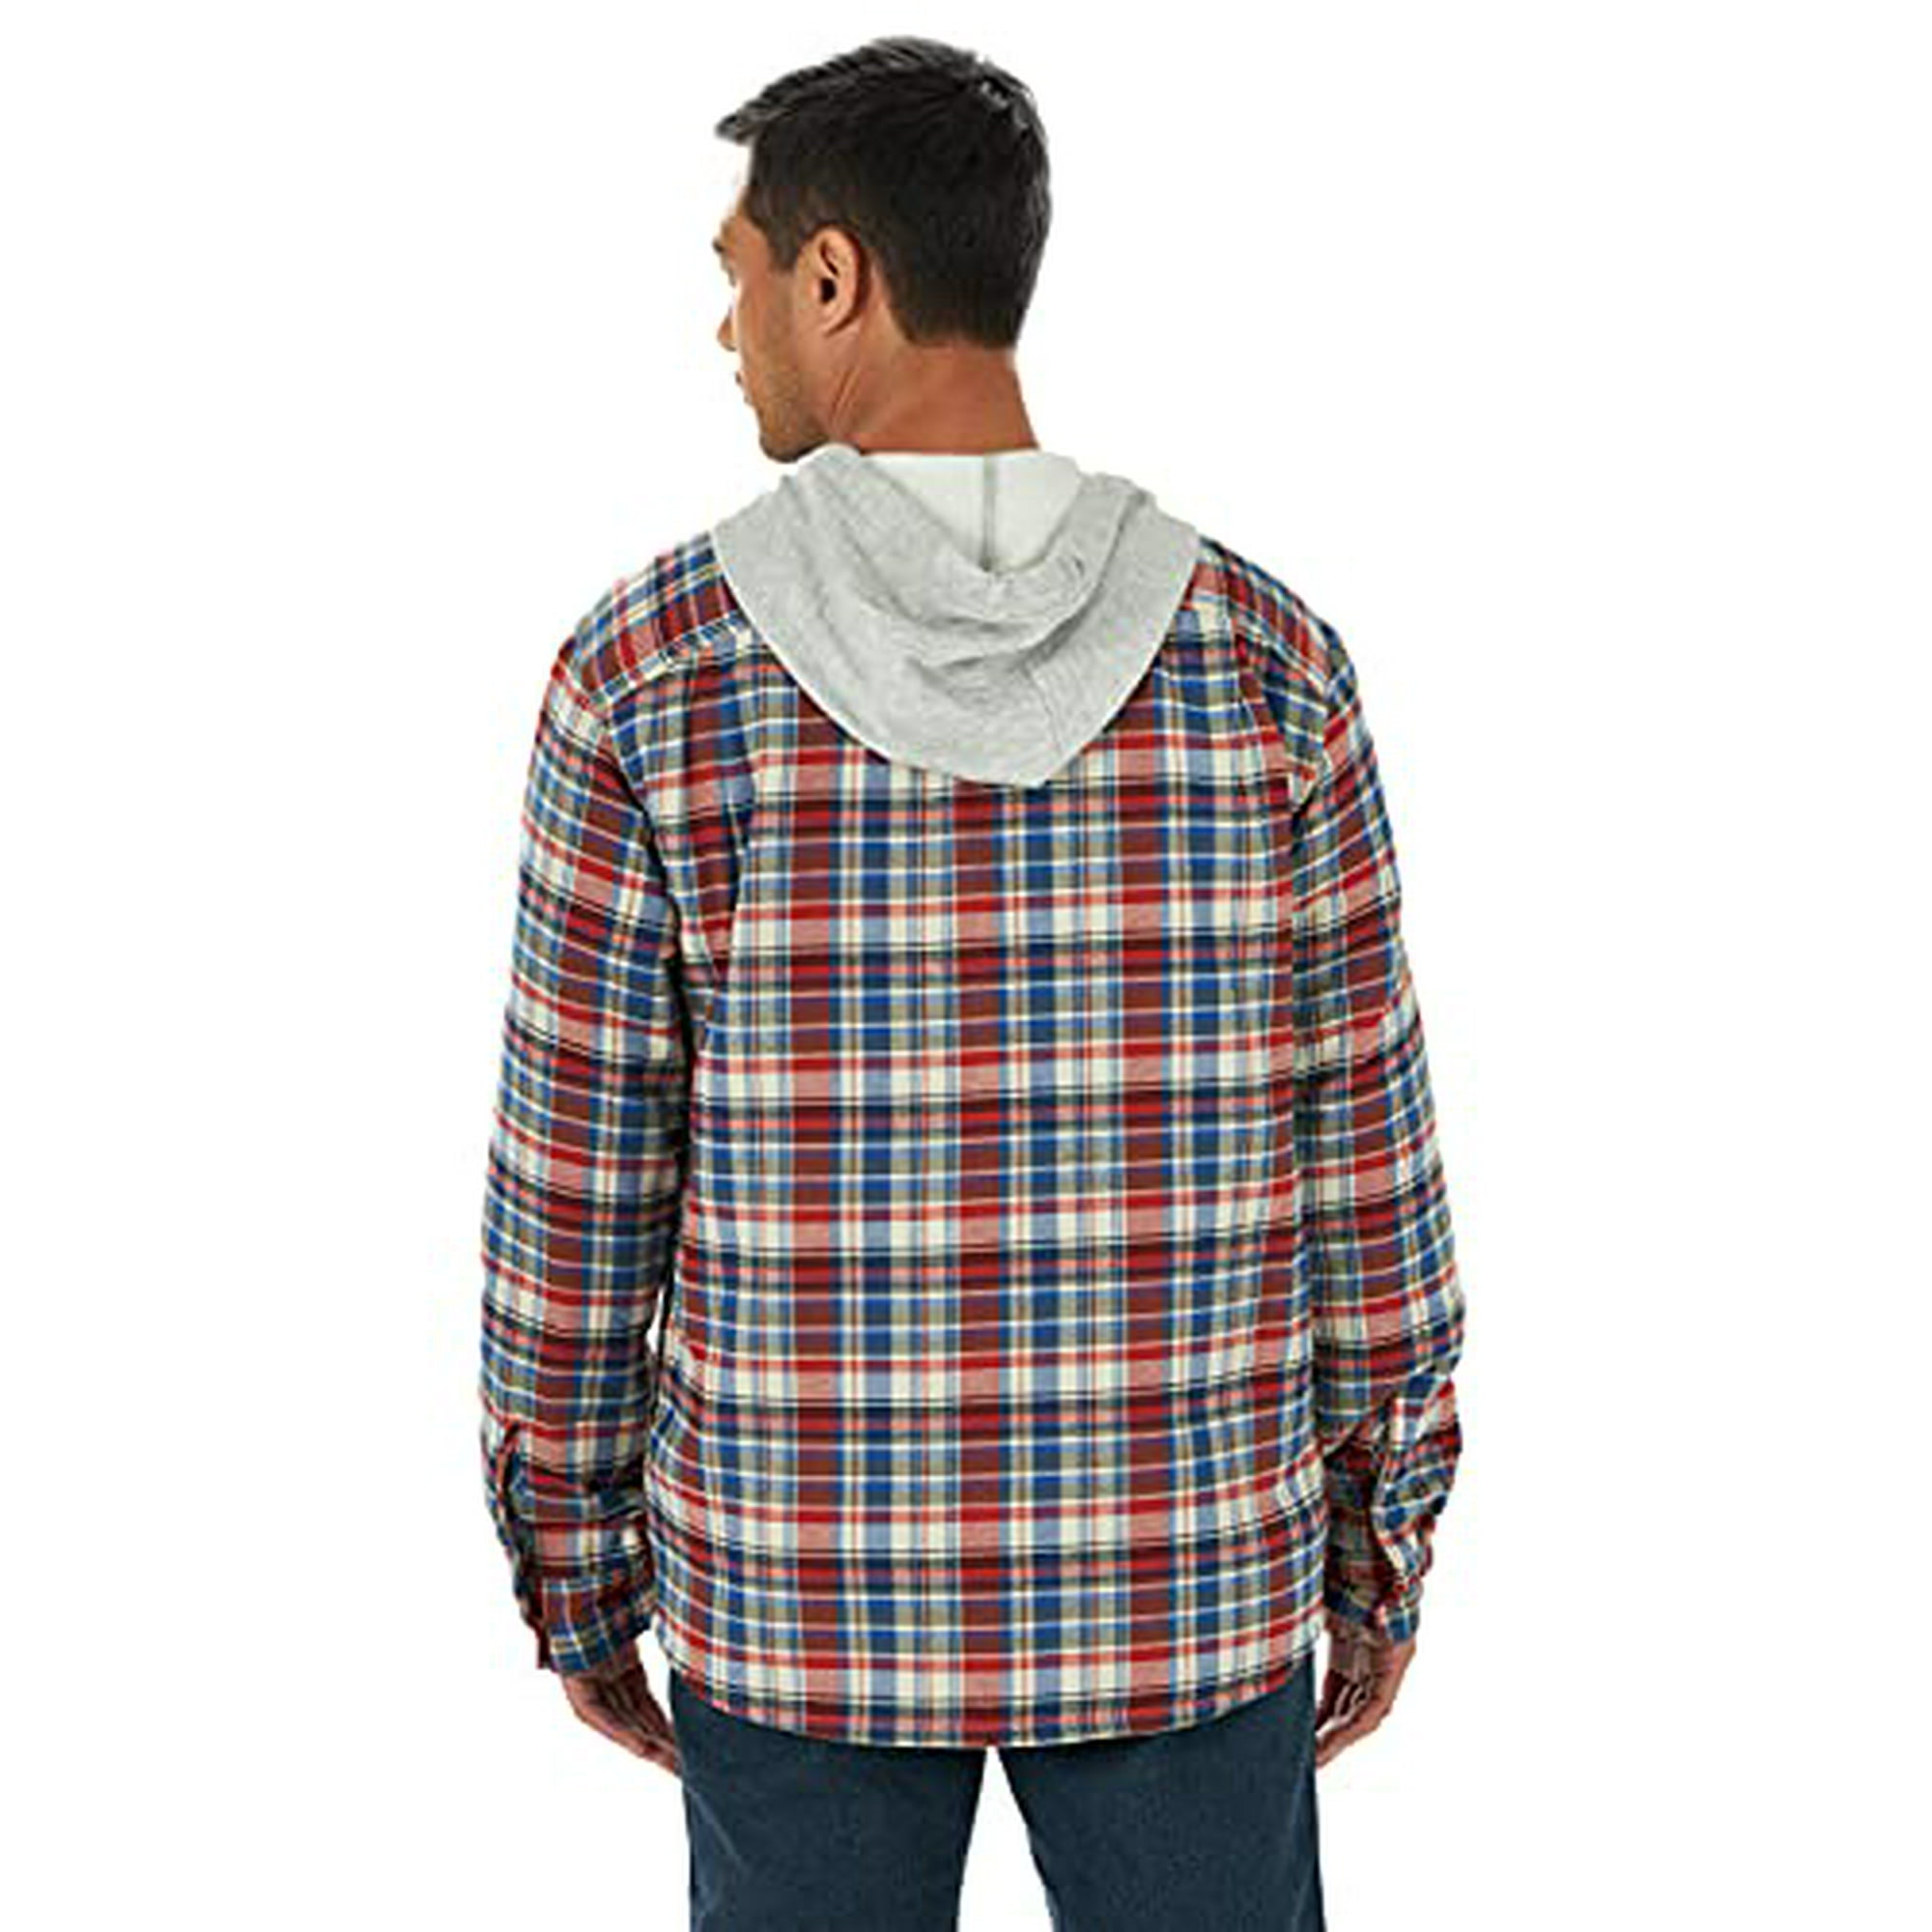 Wrangler Authentics Men's Long Sleeve Quilted Lined Flannel Shirt Jacket  with Hood, Bossa Nova, Large | Walmart Canada